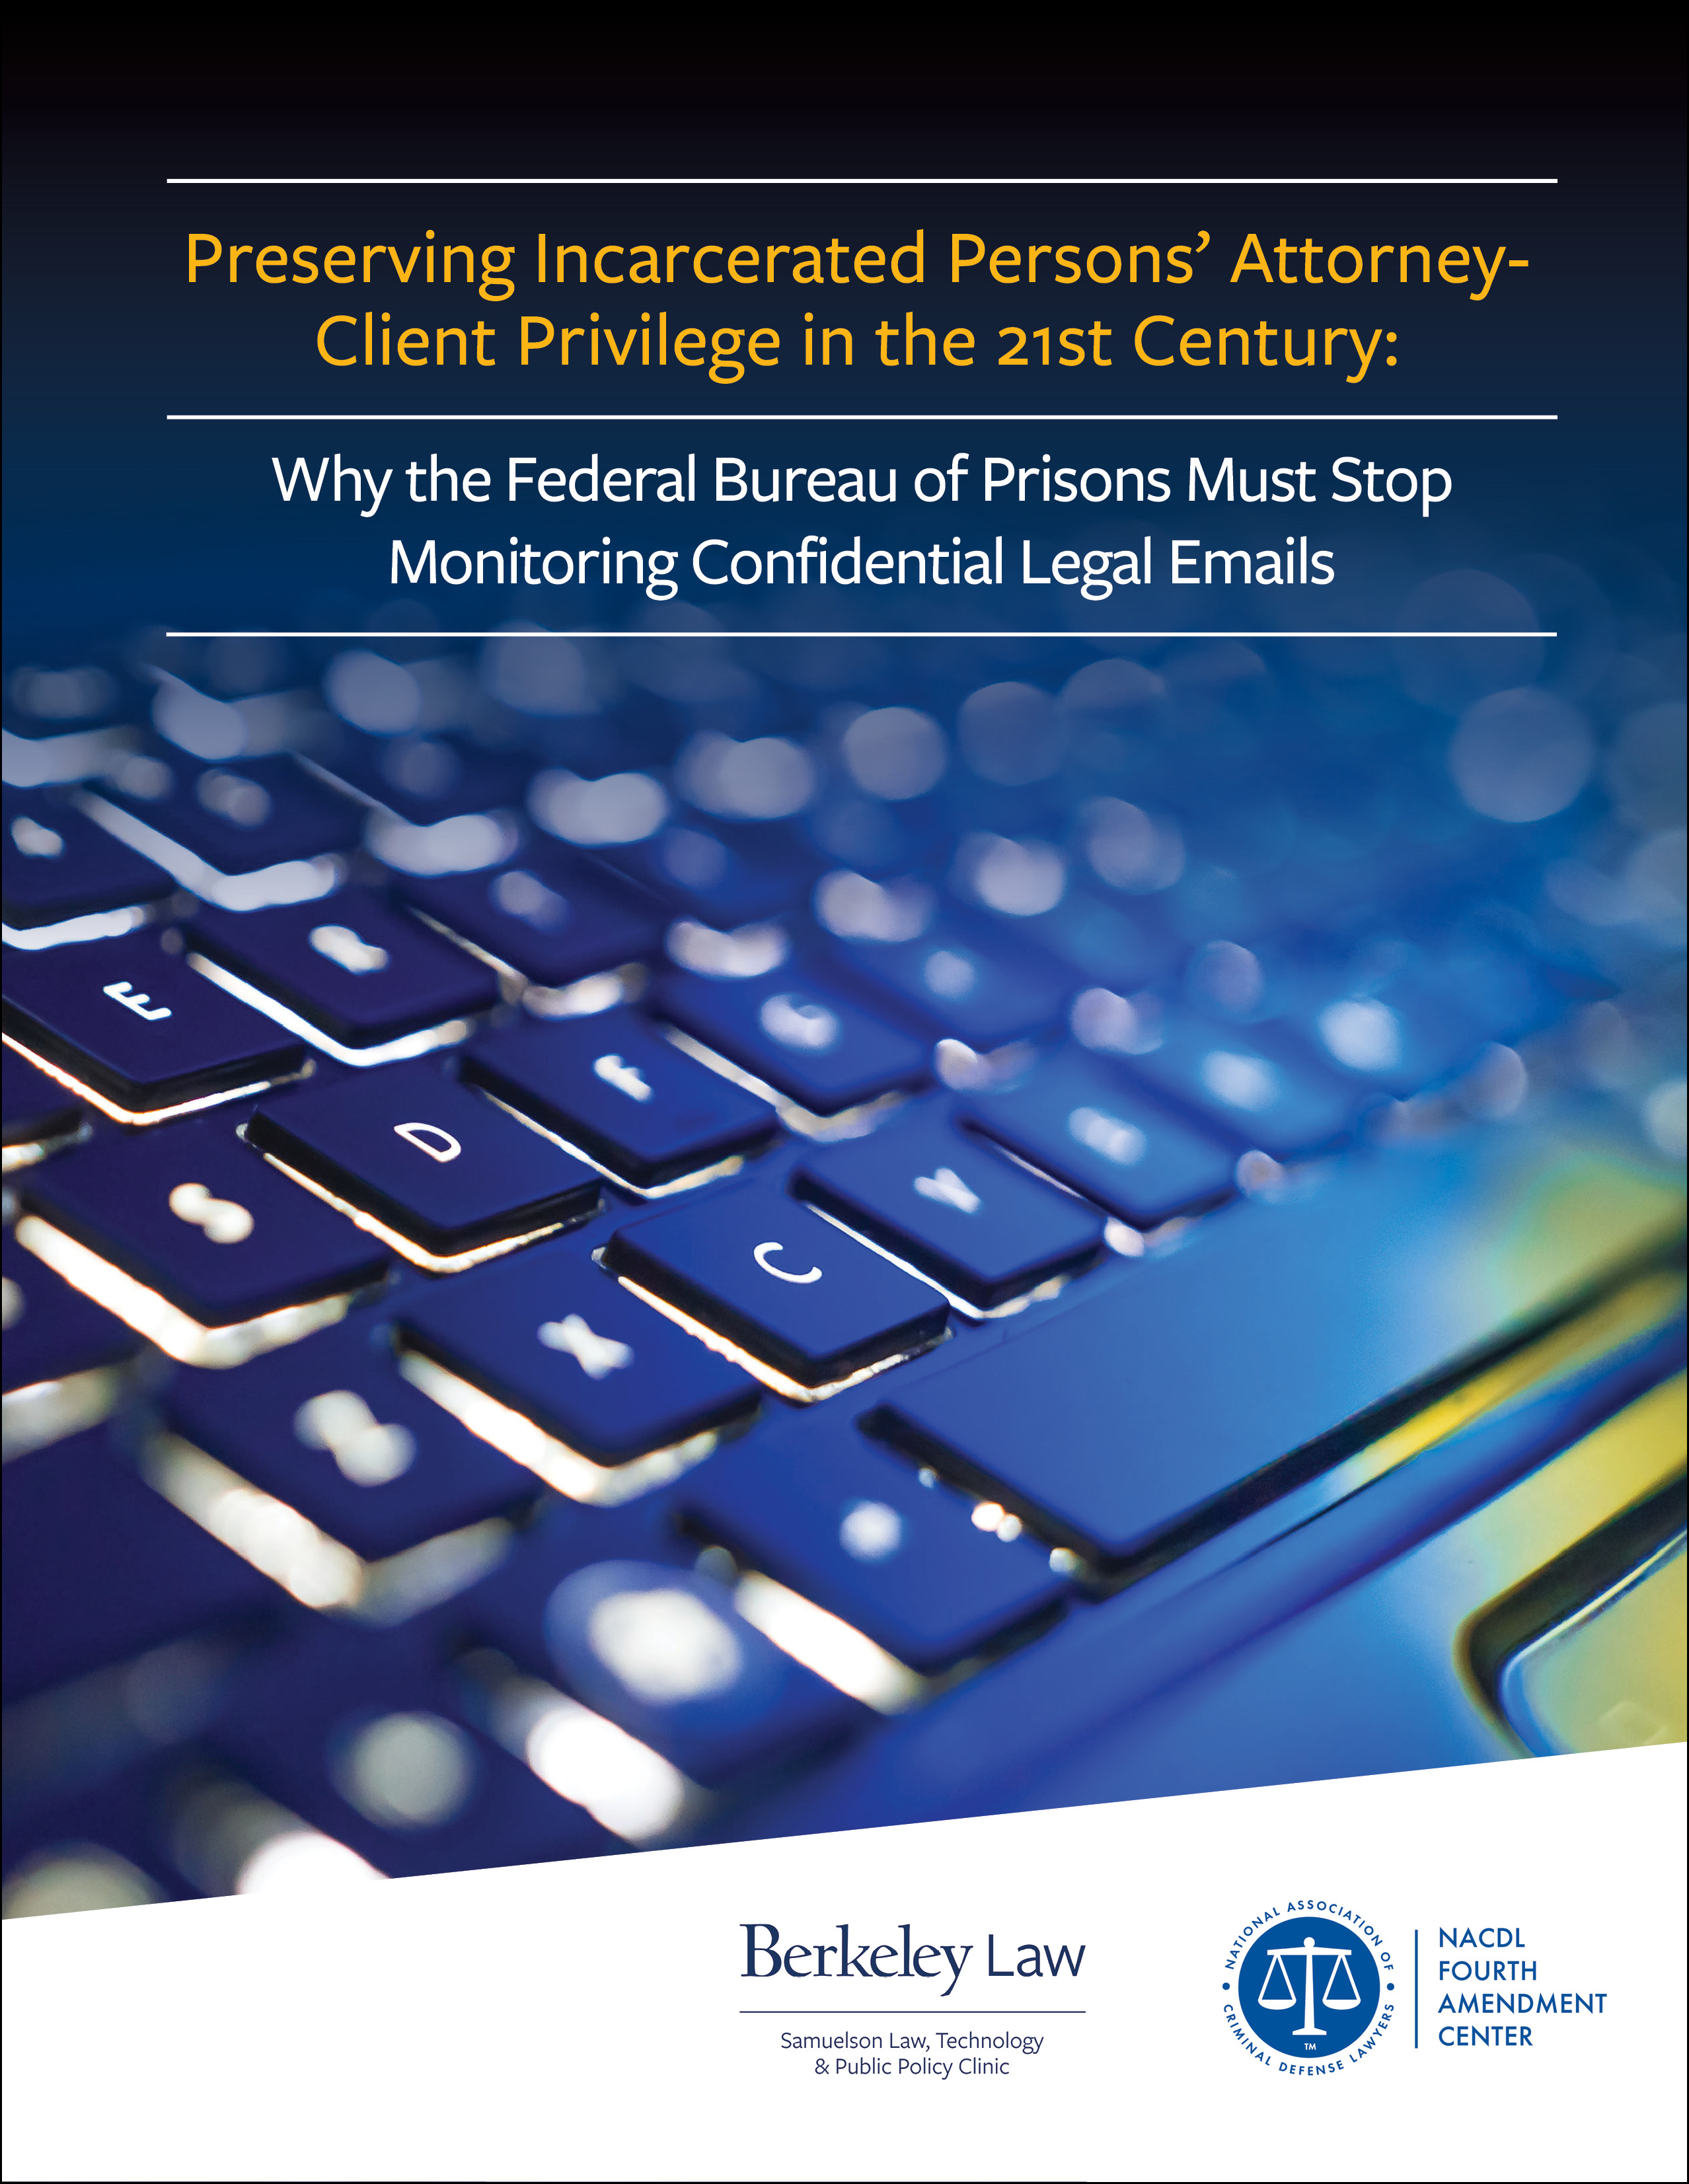 Preserving Incarcerated Persons’ Attorney-Client Privilege in the 21st Century Cover